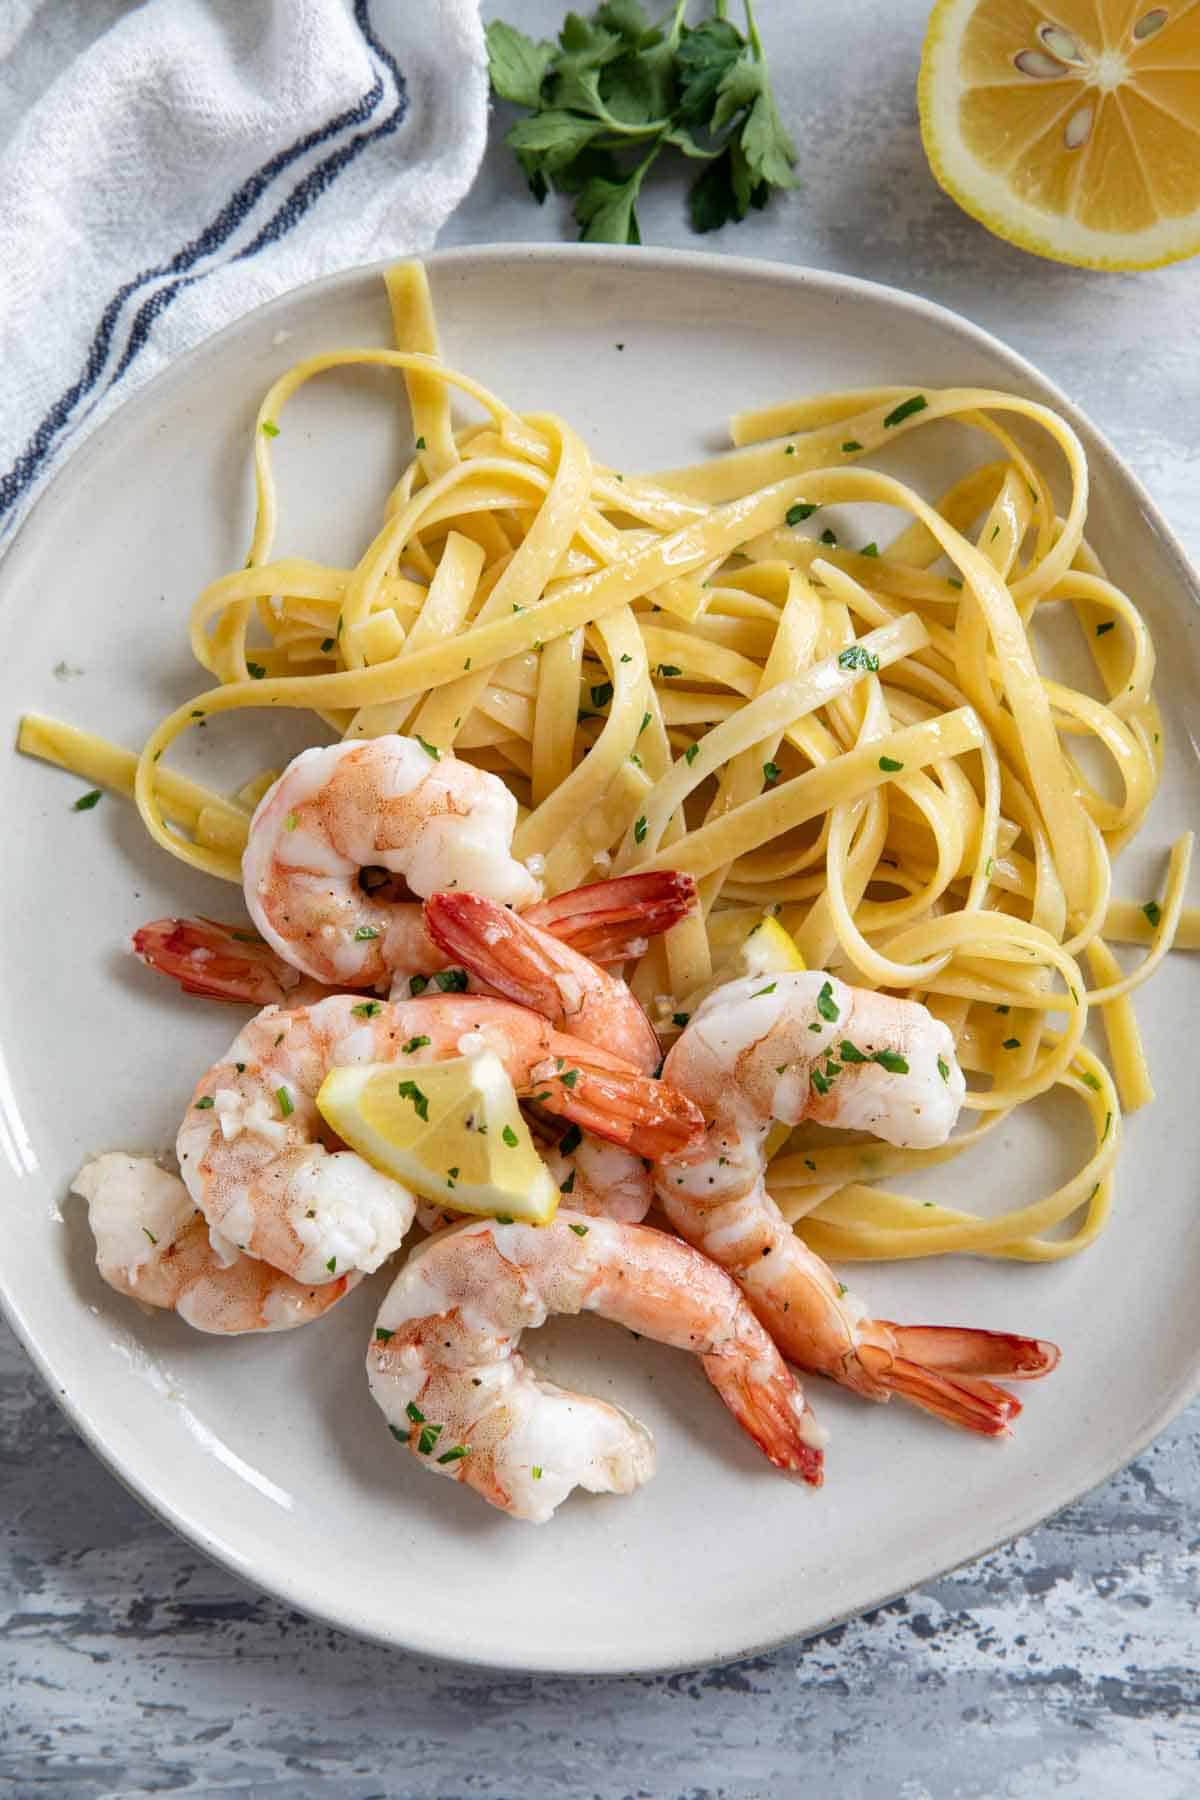 Baked shrimp with pasta on a plate.